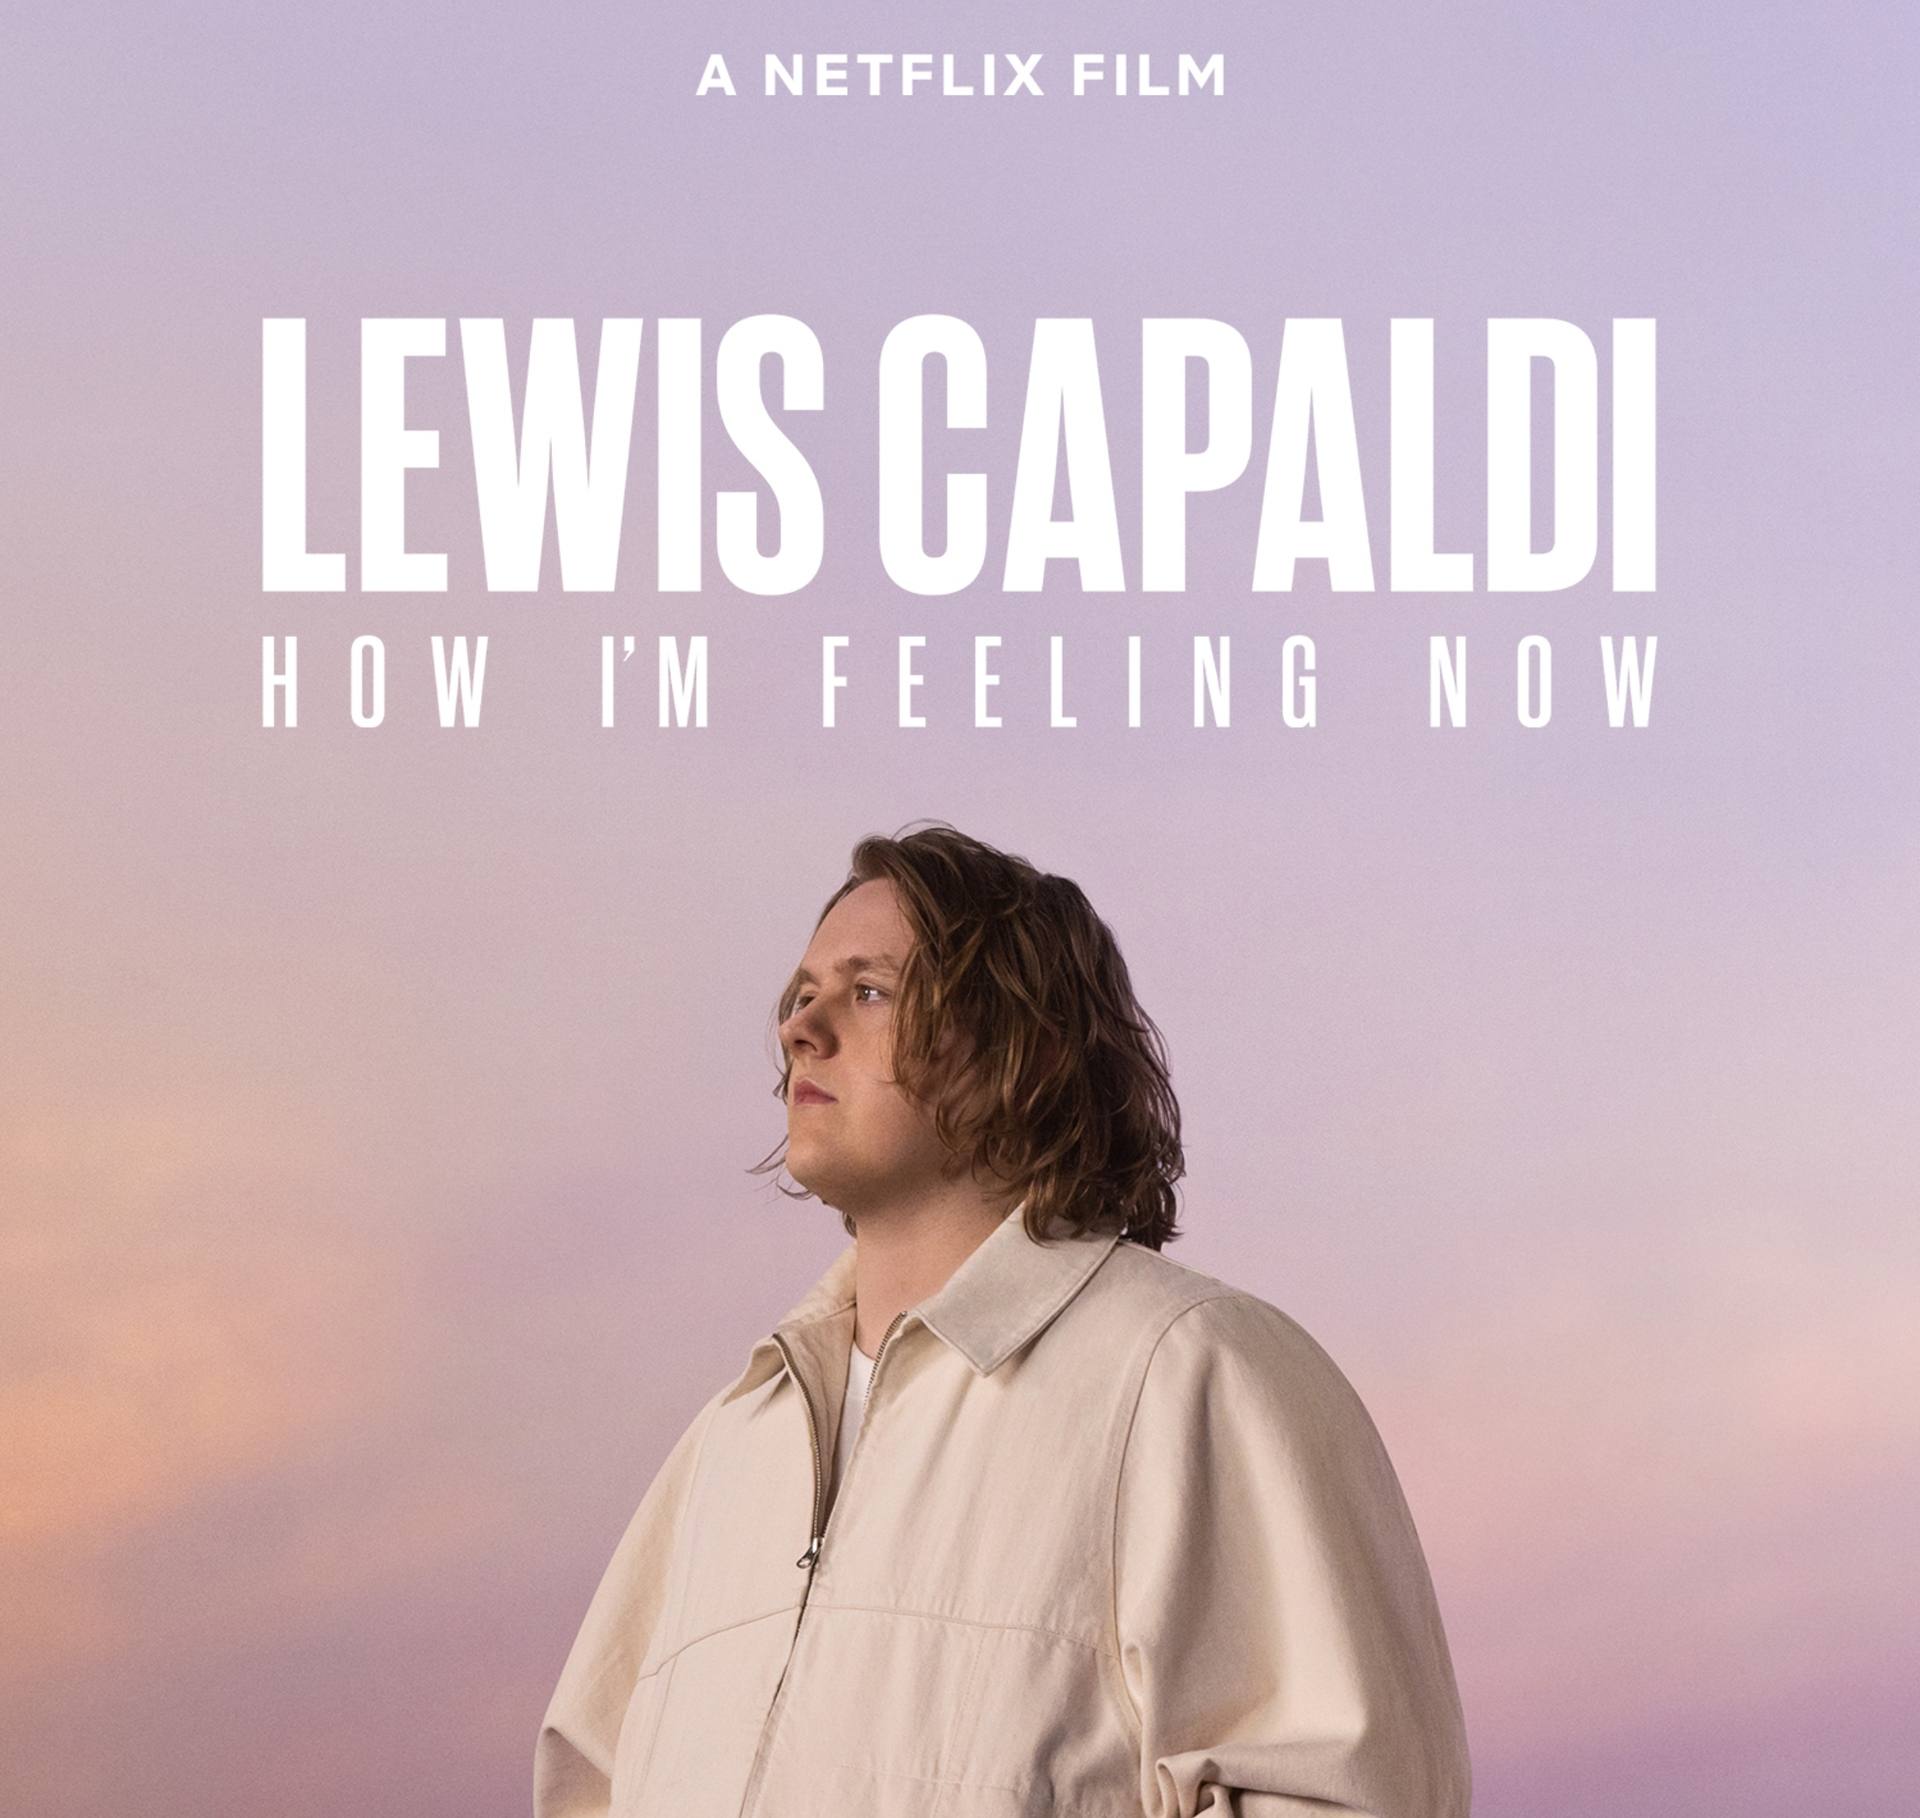 Lewis Capaldi: How I'm Feeling Now will be released globally on Netflix on April 5.